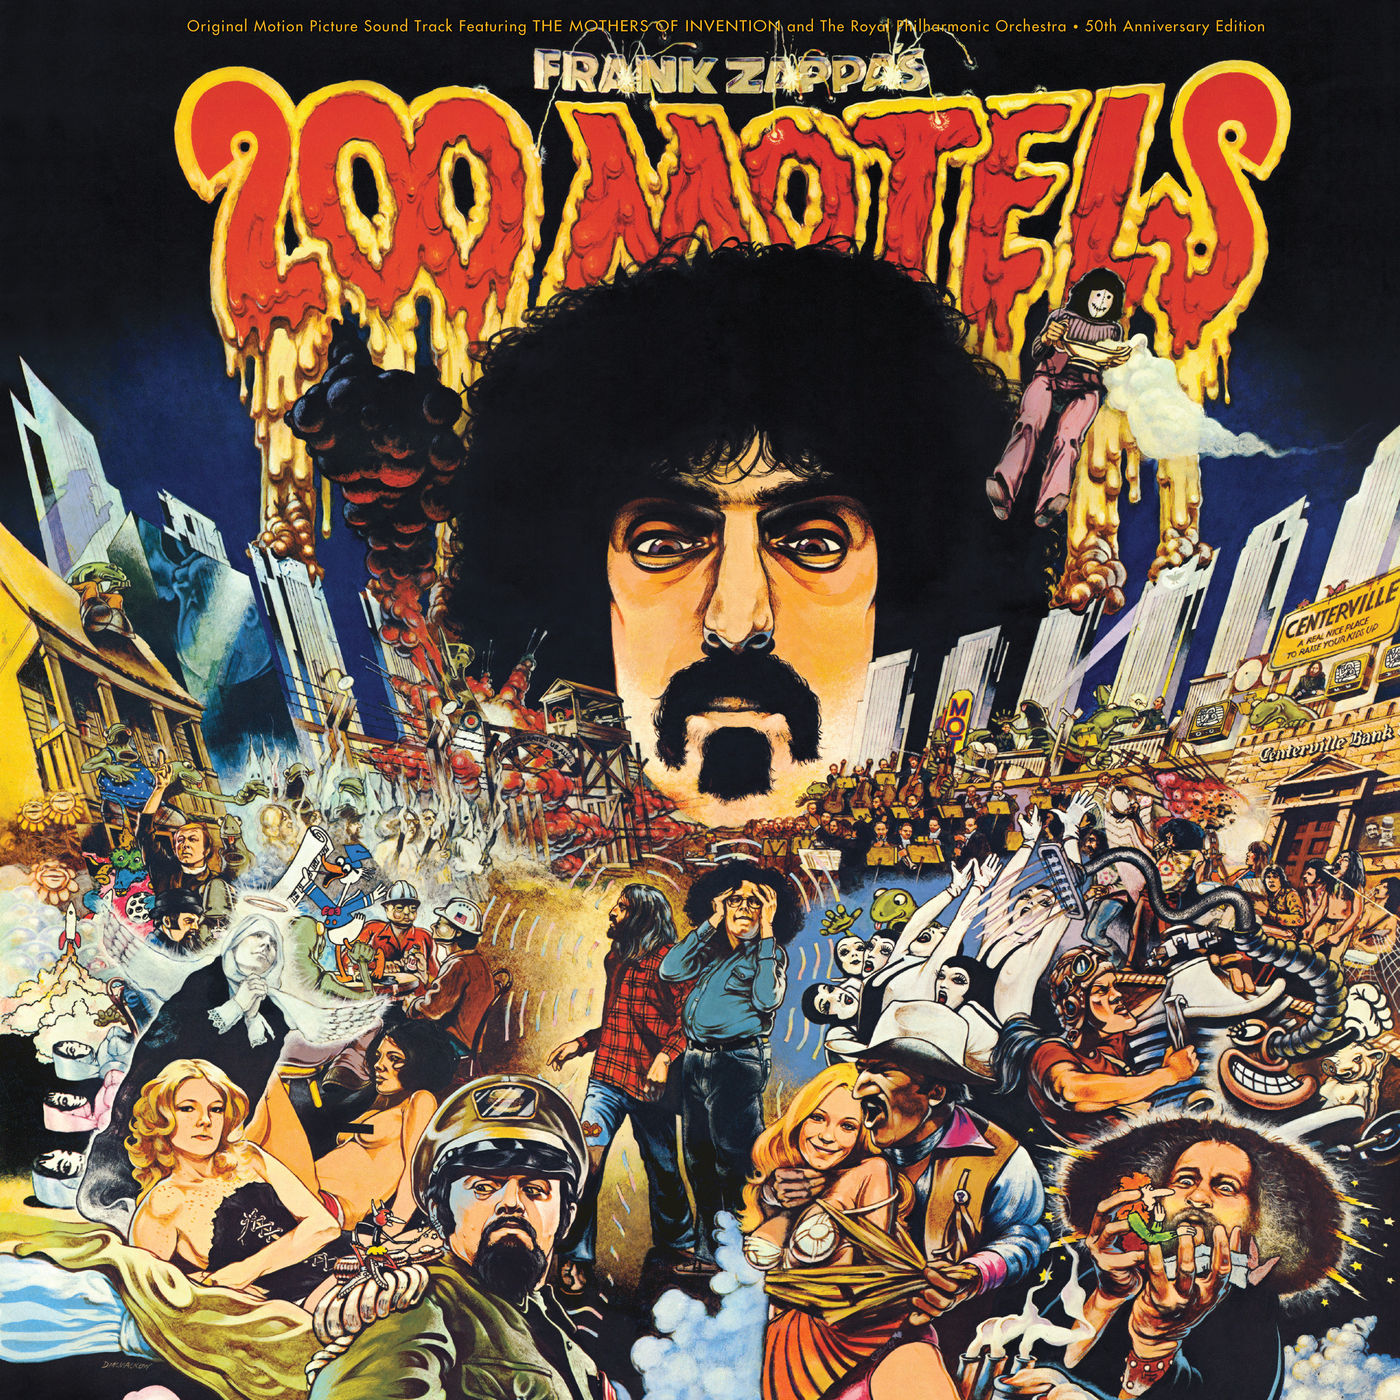 Frank Zappa - The Mothers Of Invention - 1971 - 200 Motels 50th Anniv Ed [2021] CD3 24-96